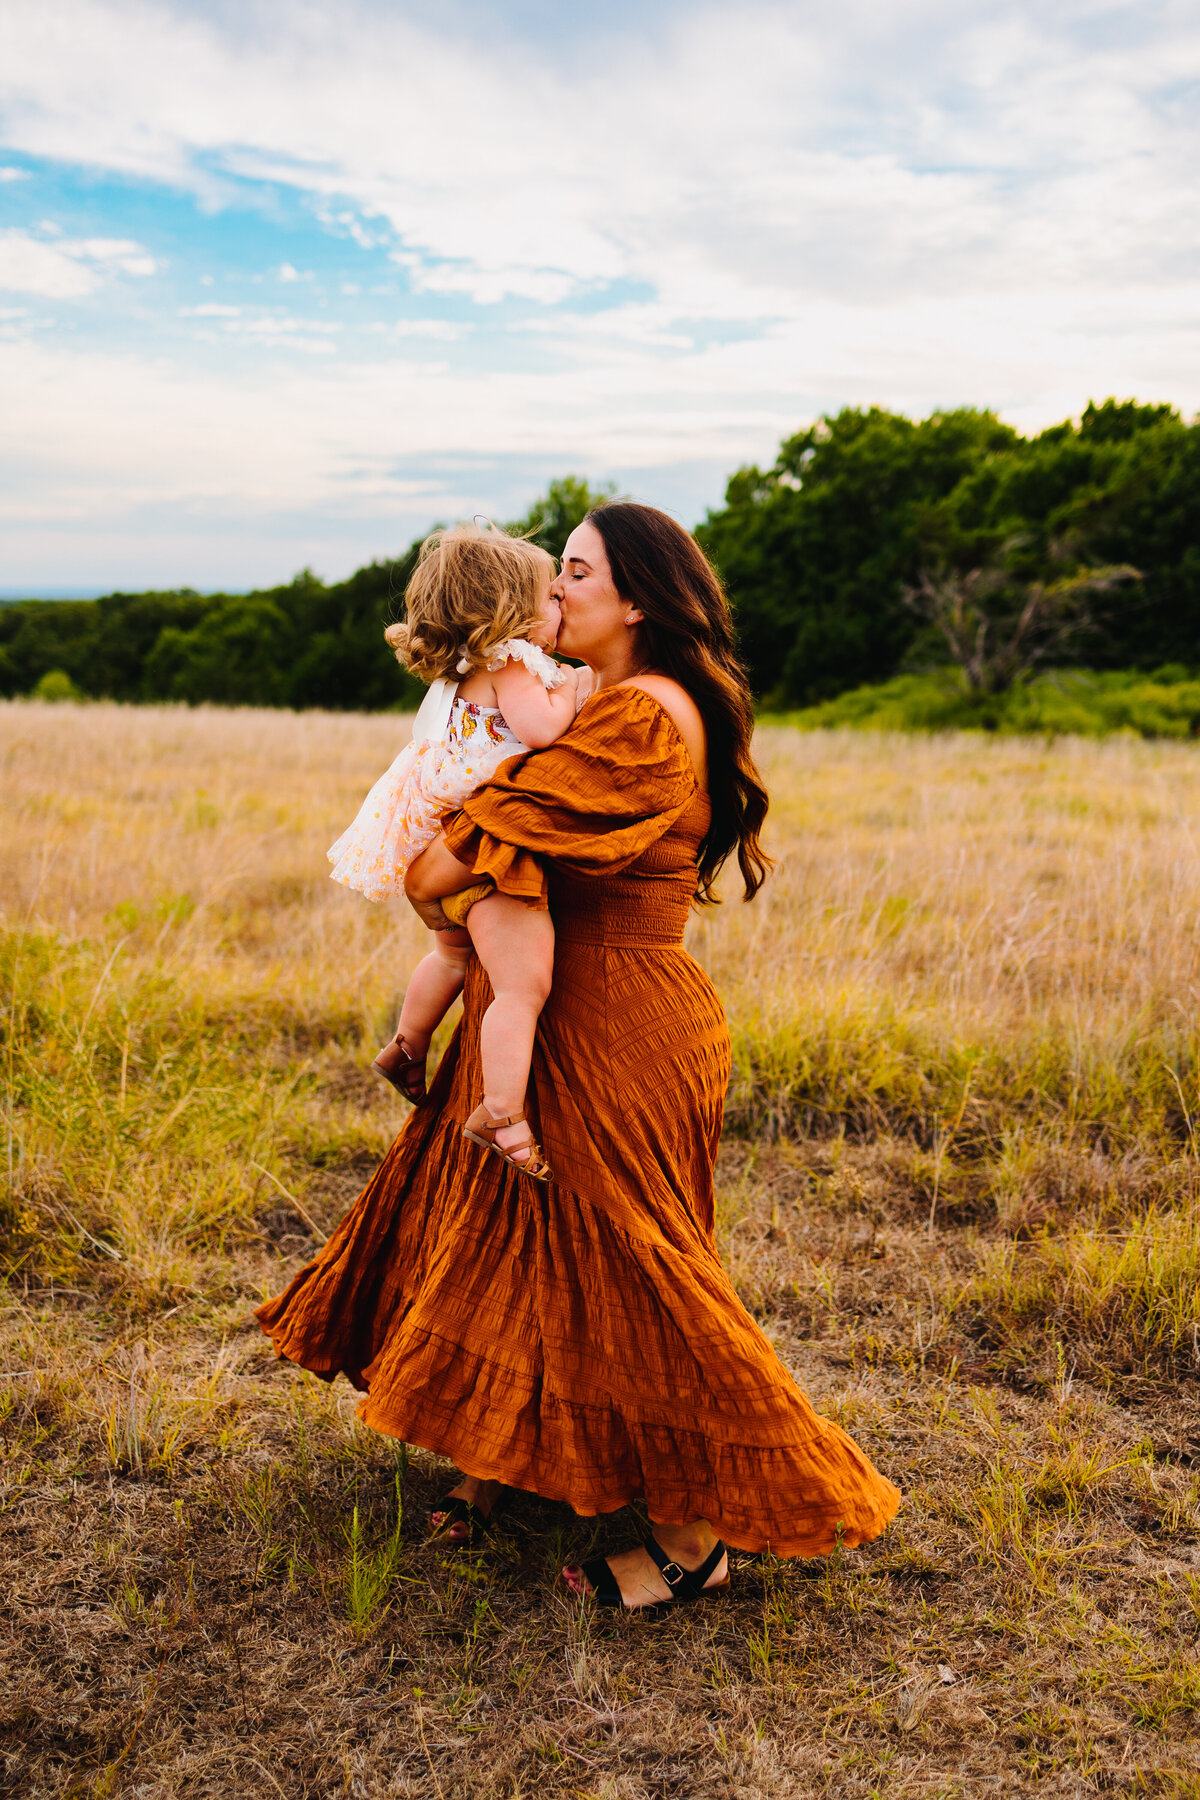 Maternity and family photography packages in Albuquerque feature a beautiful scene of a mother wearing an orange vintage long dress, carrying her little daughter. The setting is a serene forest with lush green trees